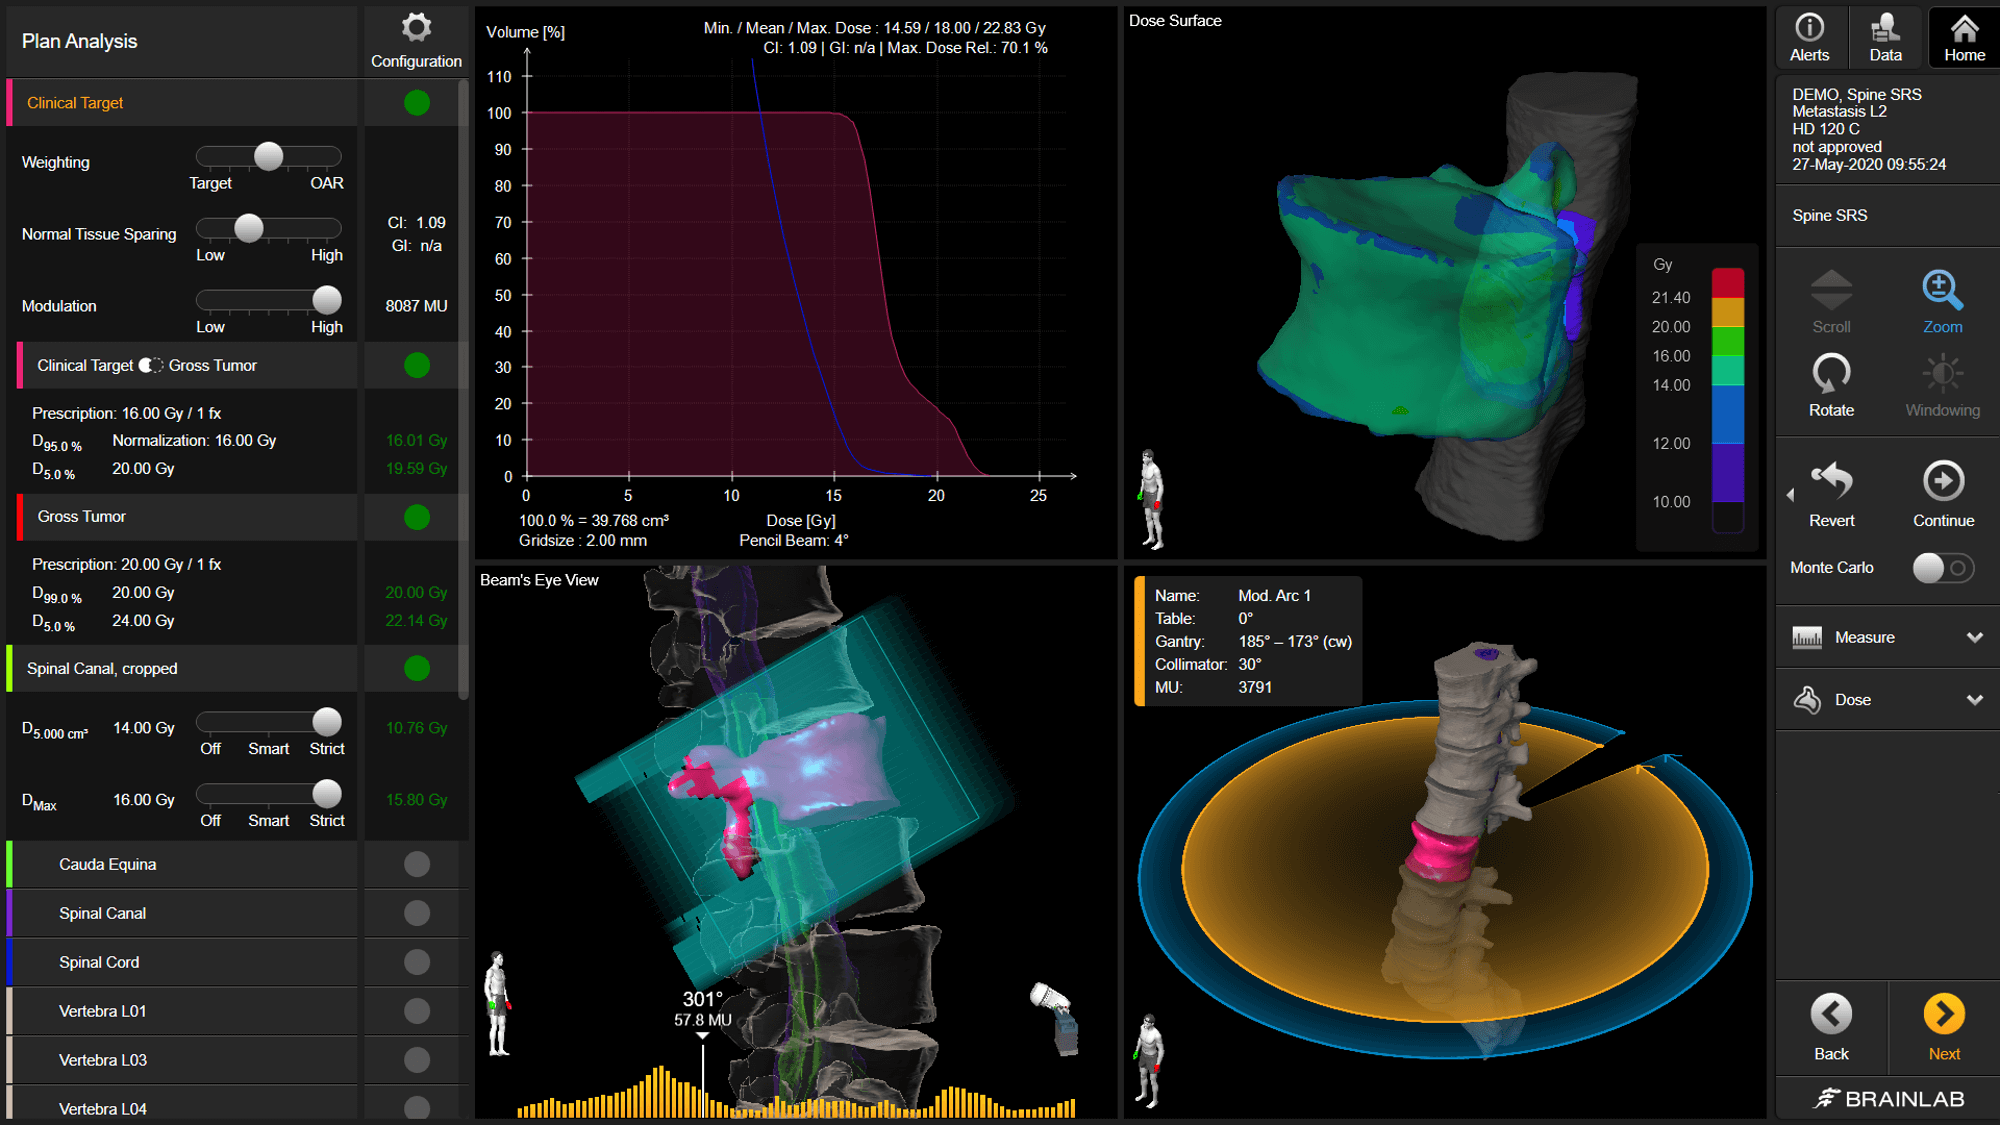 Software screenshot of Element Spine SRS and the various tools it provides to visualize the dose created for a radiotherapy plan.